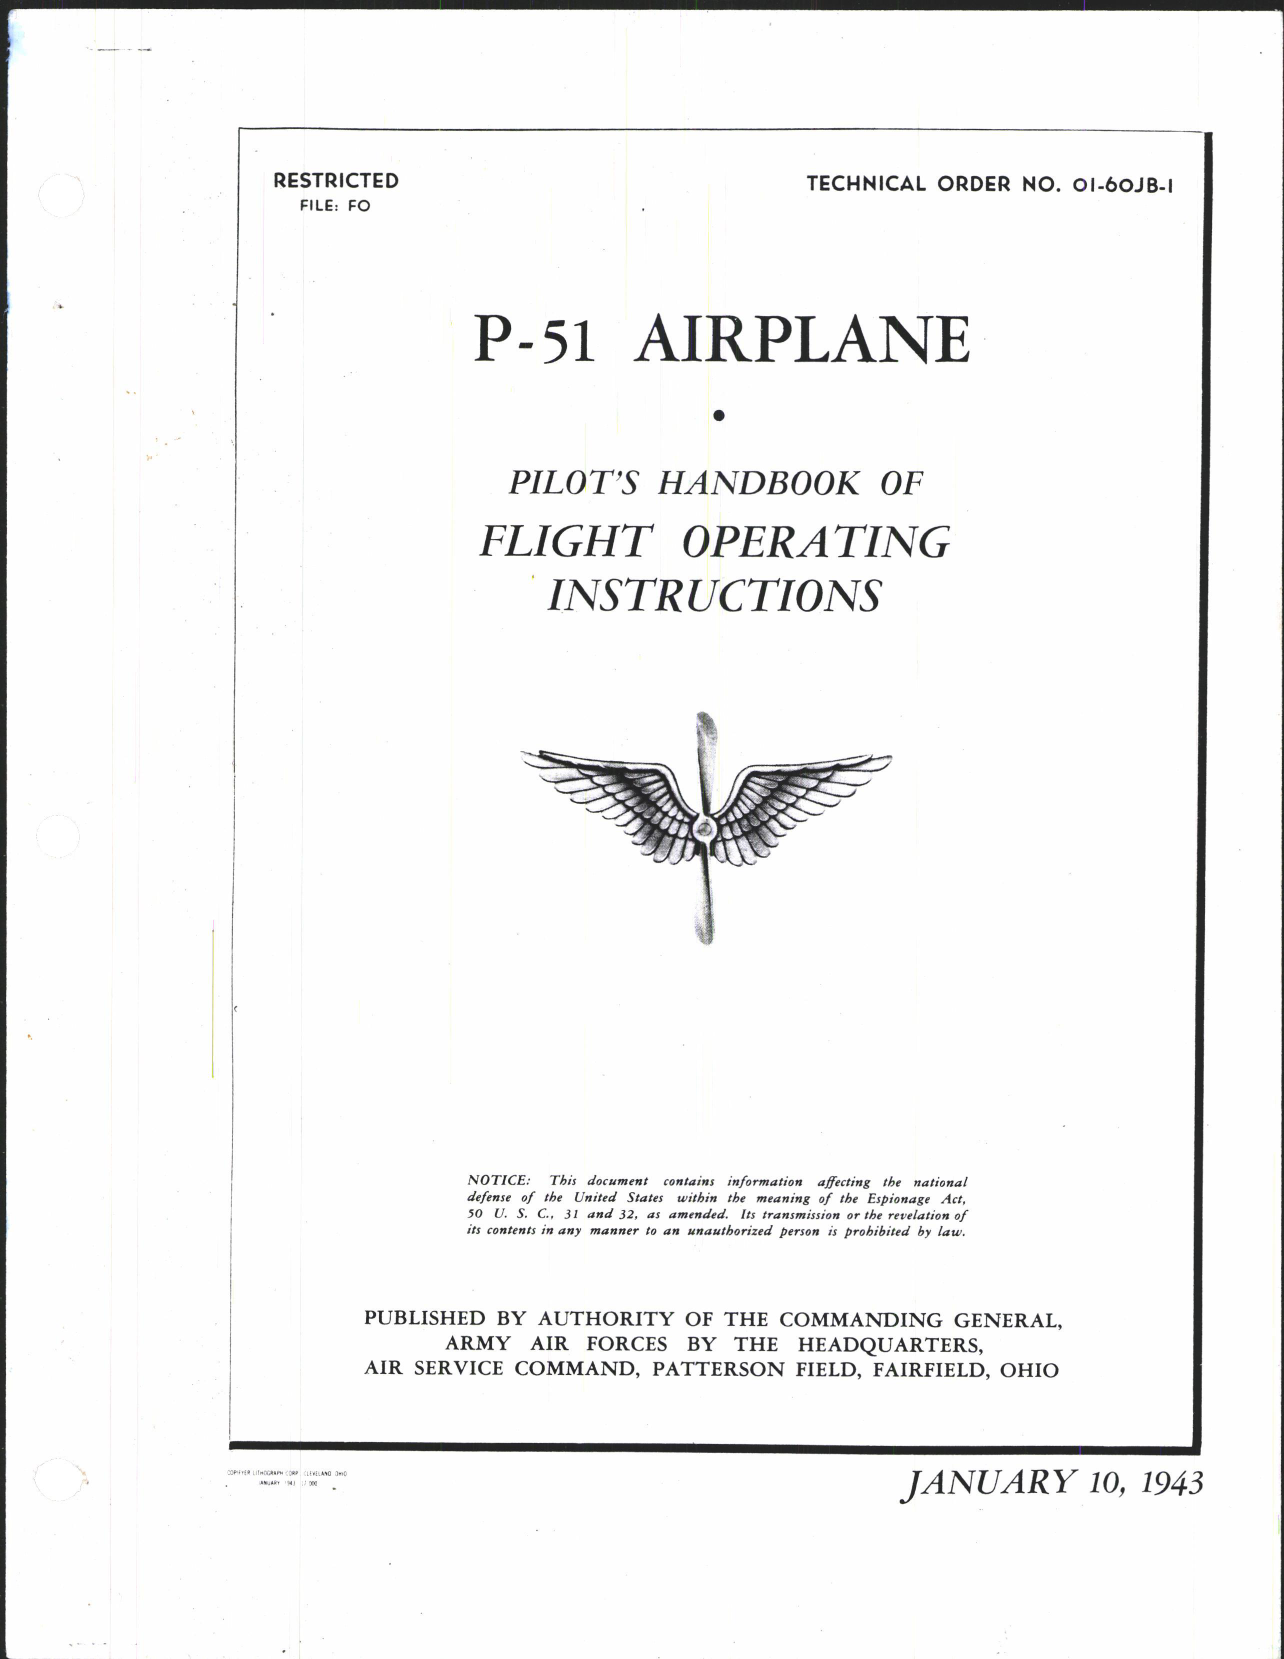 Sample page 1 from AirCorps Library document: Pilot's Handbook of Flight Operating Instructions for P-51 Airplane